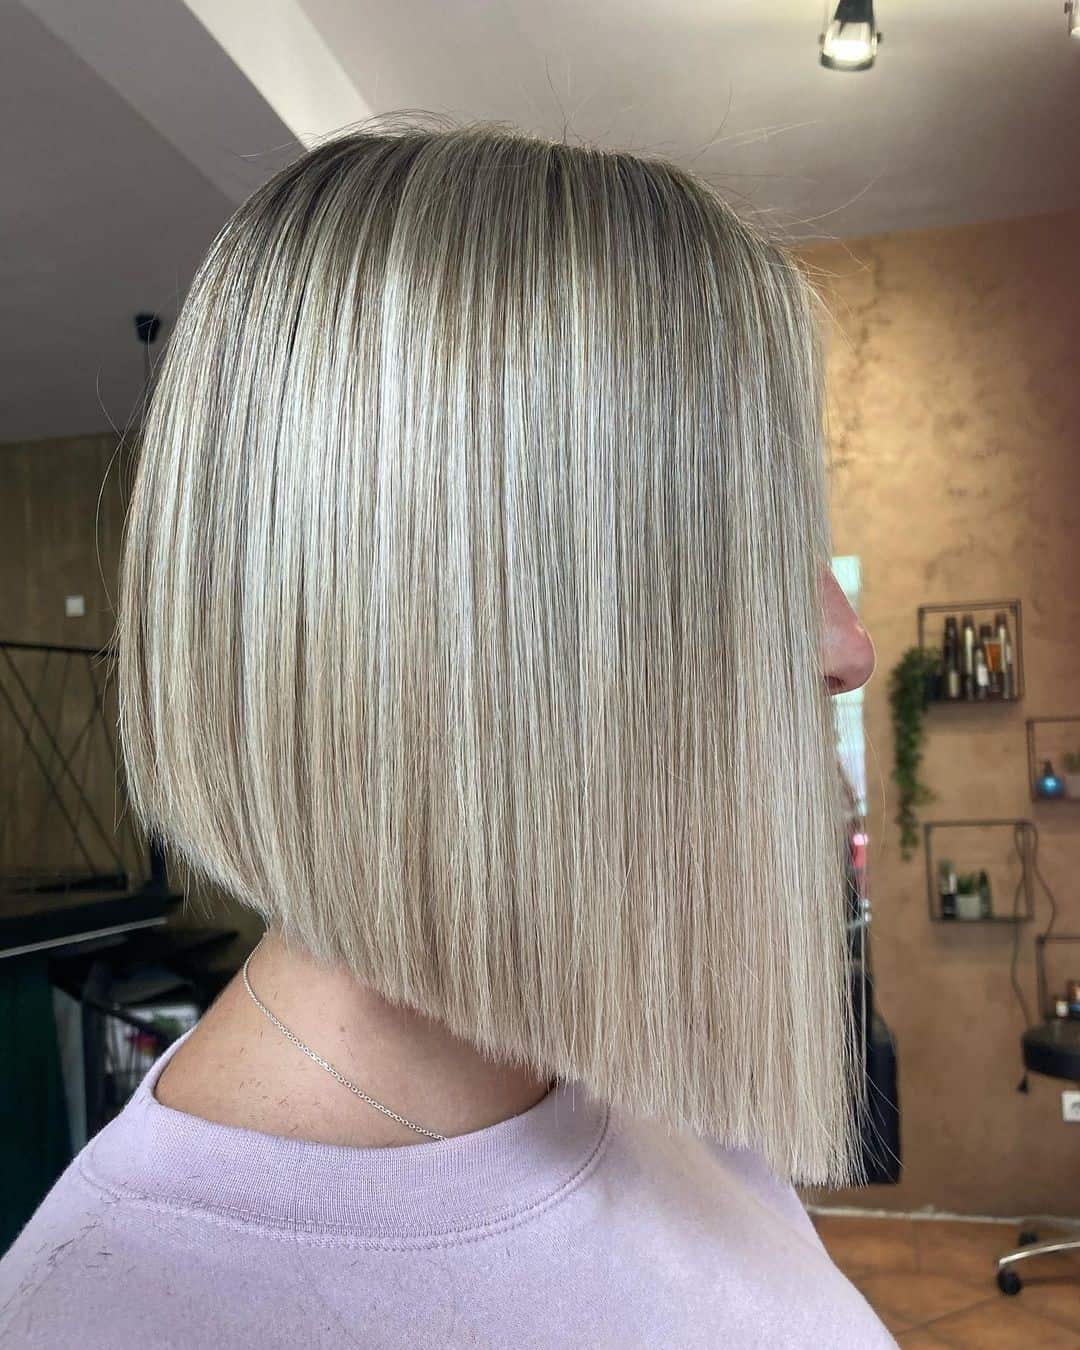 Sharp & Defined Blonde Colored Bob Hairstyle